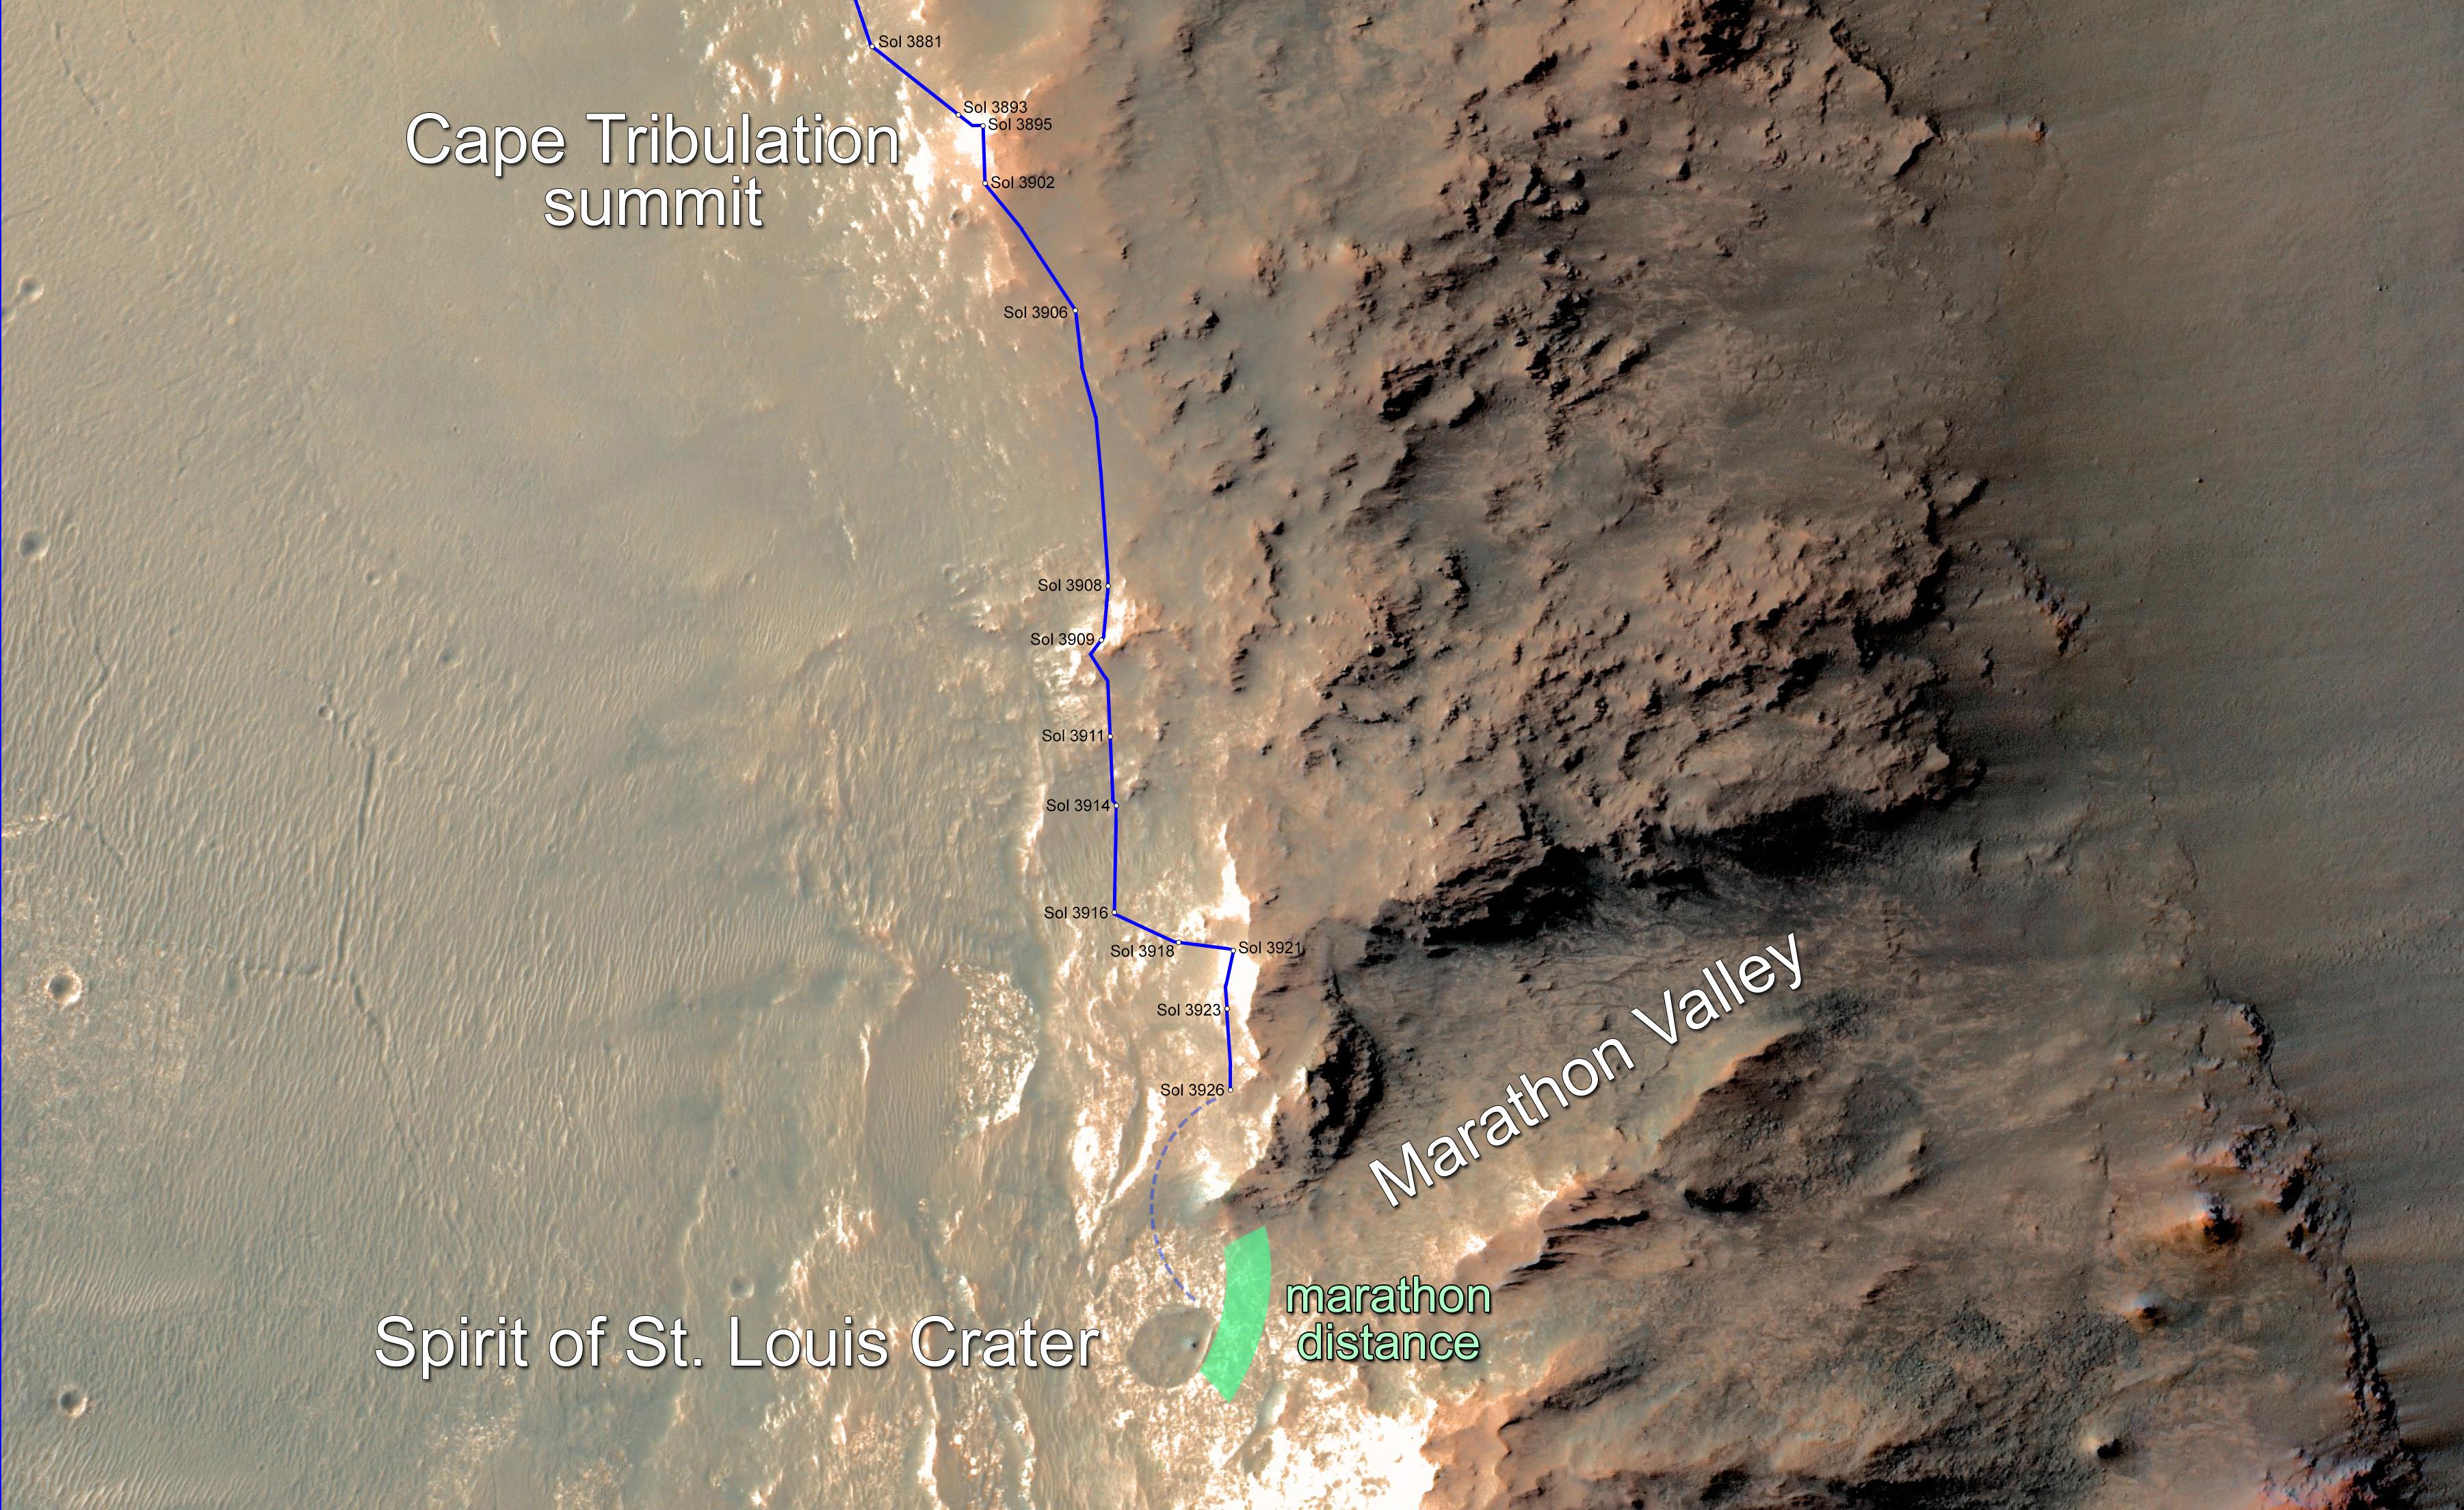 Opportunity Rover Nears Mars Marathon Feat.  In February 2015, NASA's Mars Exploration Rover Opportunity is approaching a cumulative driving distance on Mars equal to the length of a marathon race. This map shows the rover's position relative to where it could surpass that distance. The map shows the rover's location as of Feb. 10, 2015, in the context of where it has been since late December 2014 and the "Marathon Valley" science destination ahead. Opportunity is within about 220 yards (200 meters) of completing a marathon. The green band indicates where it could reach the official Olympic marathon-race distance of 26.219 miles (42.195 kilometers). The rover's route might zigzag as the rover team chooses a path toward Marathon Valley, so there is uncertainty about where exactly it will pass marathon distance. Credit: NASA/JPL-Caltech/Univ. of Arizona